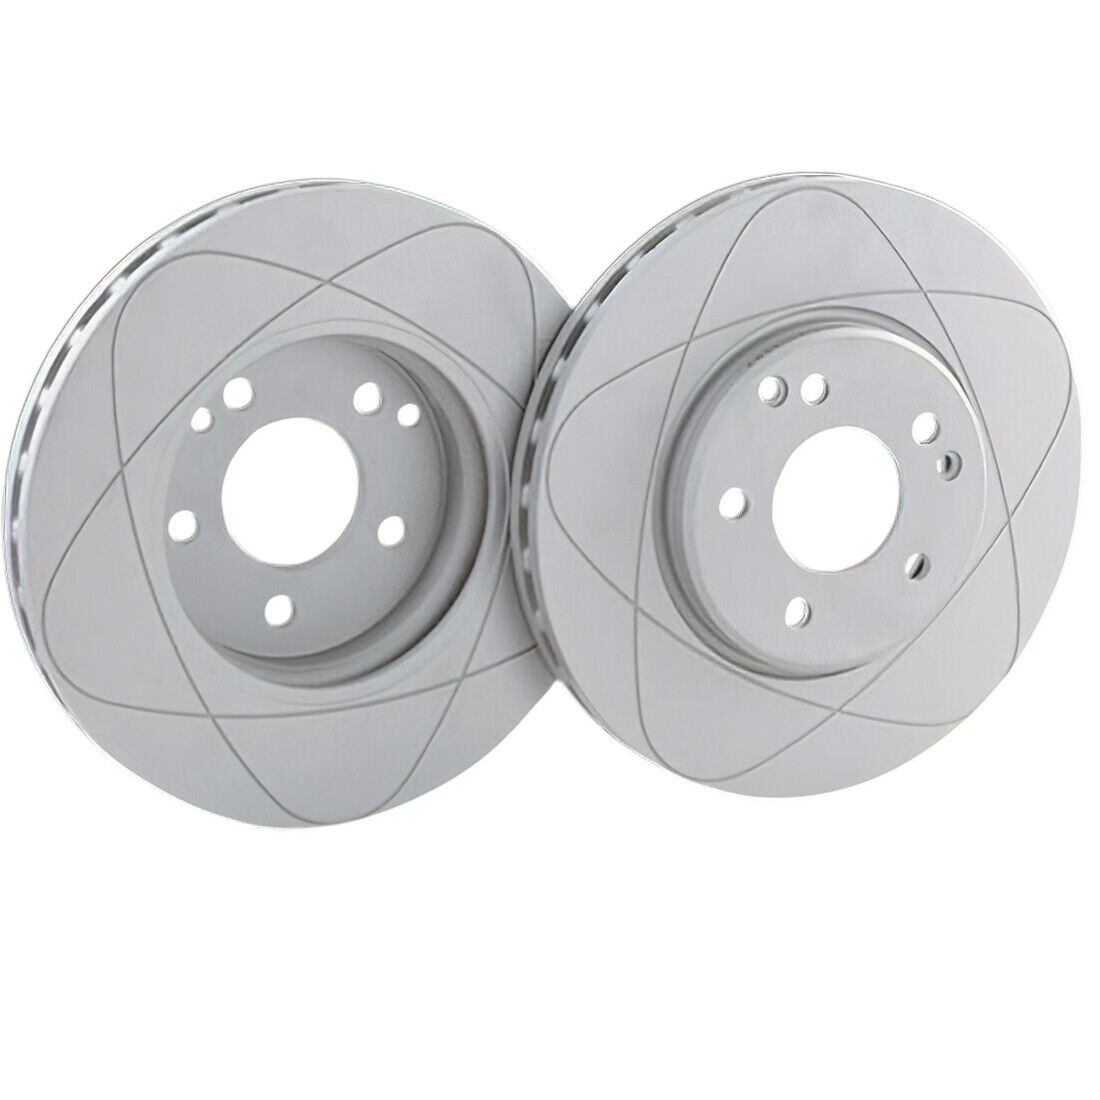 Front Premium Slotted Disc Brake Rotors, Fits Ford Windstar 99-03; 282mm